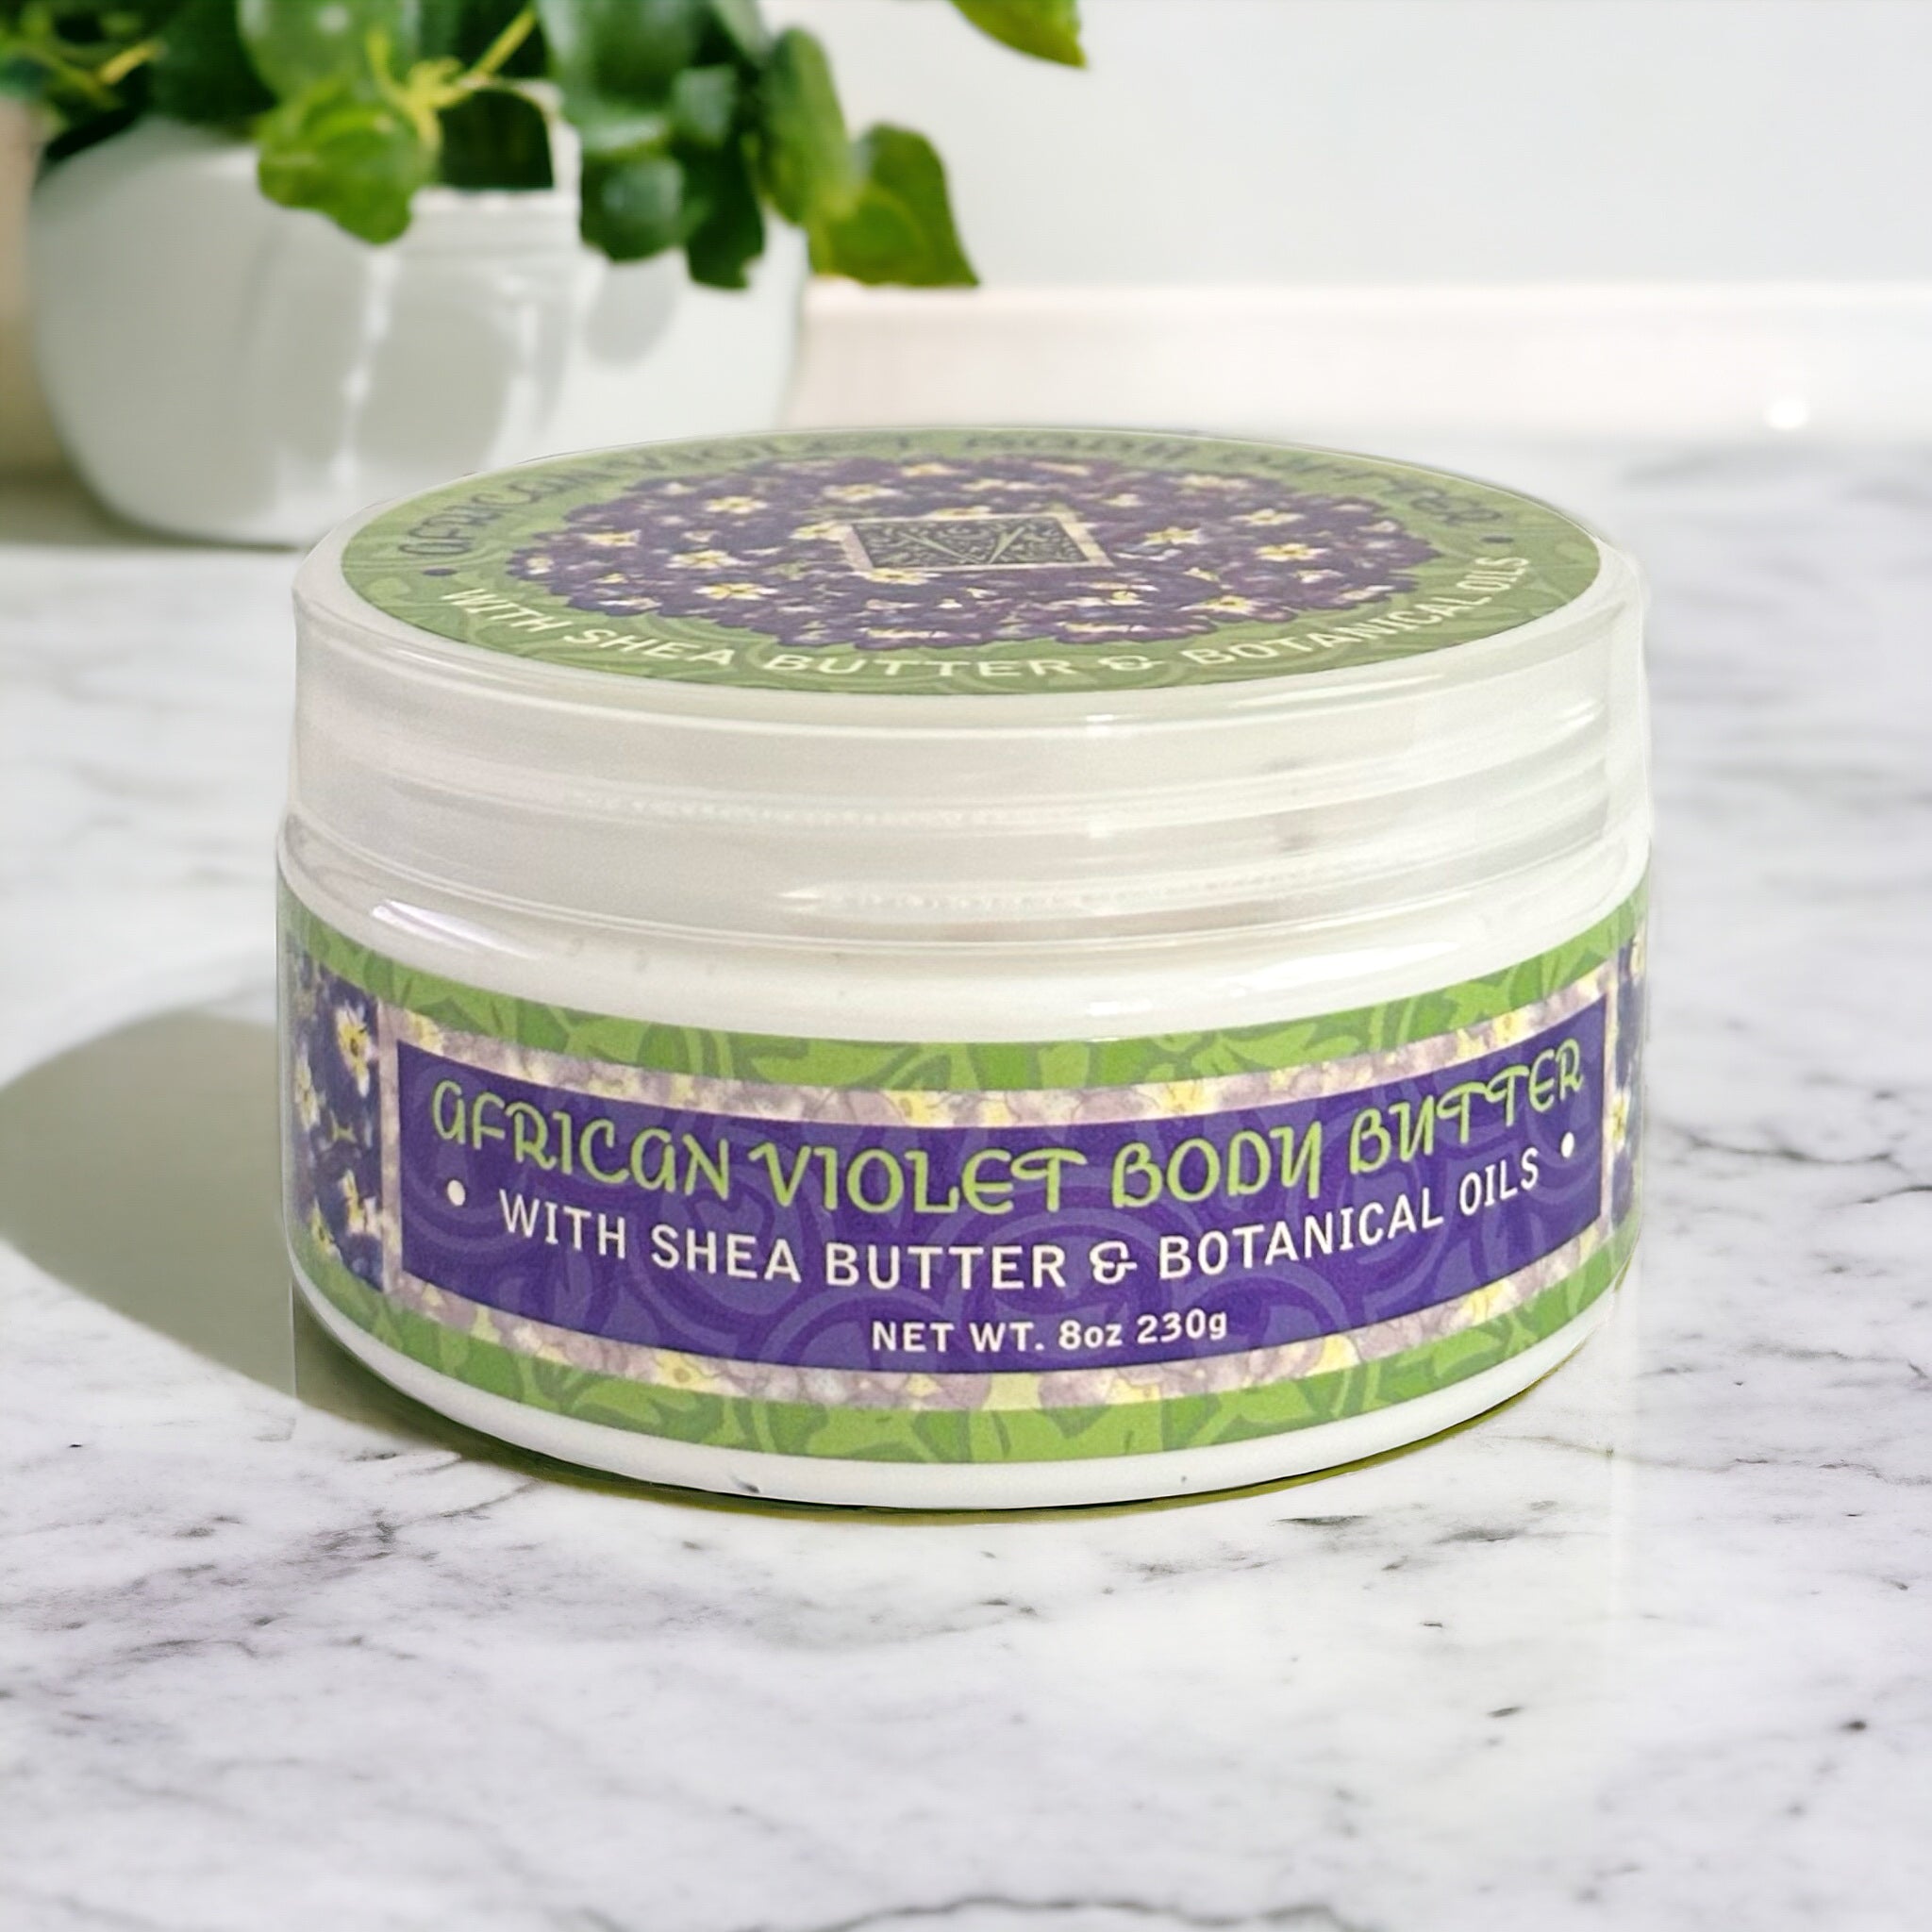 AFRICAN VIOLET Body Butter - Greenwich Bay Trading Company